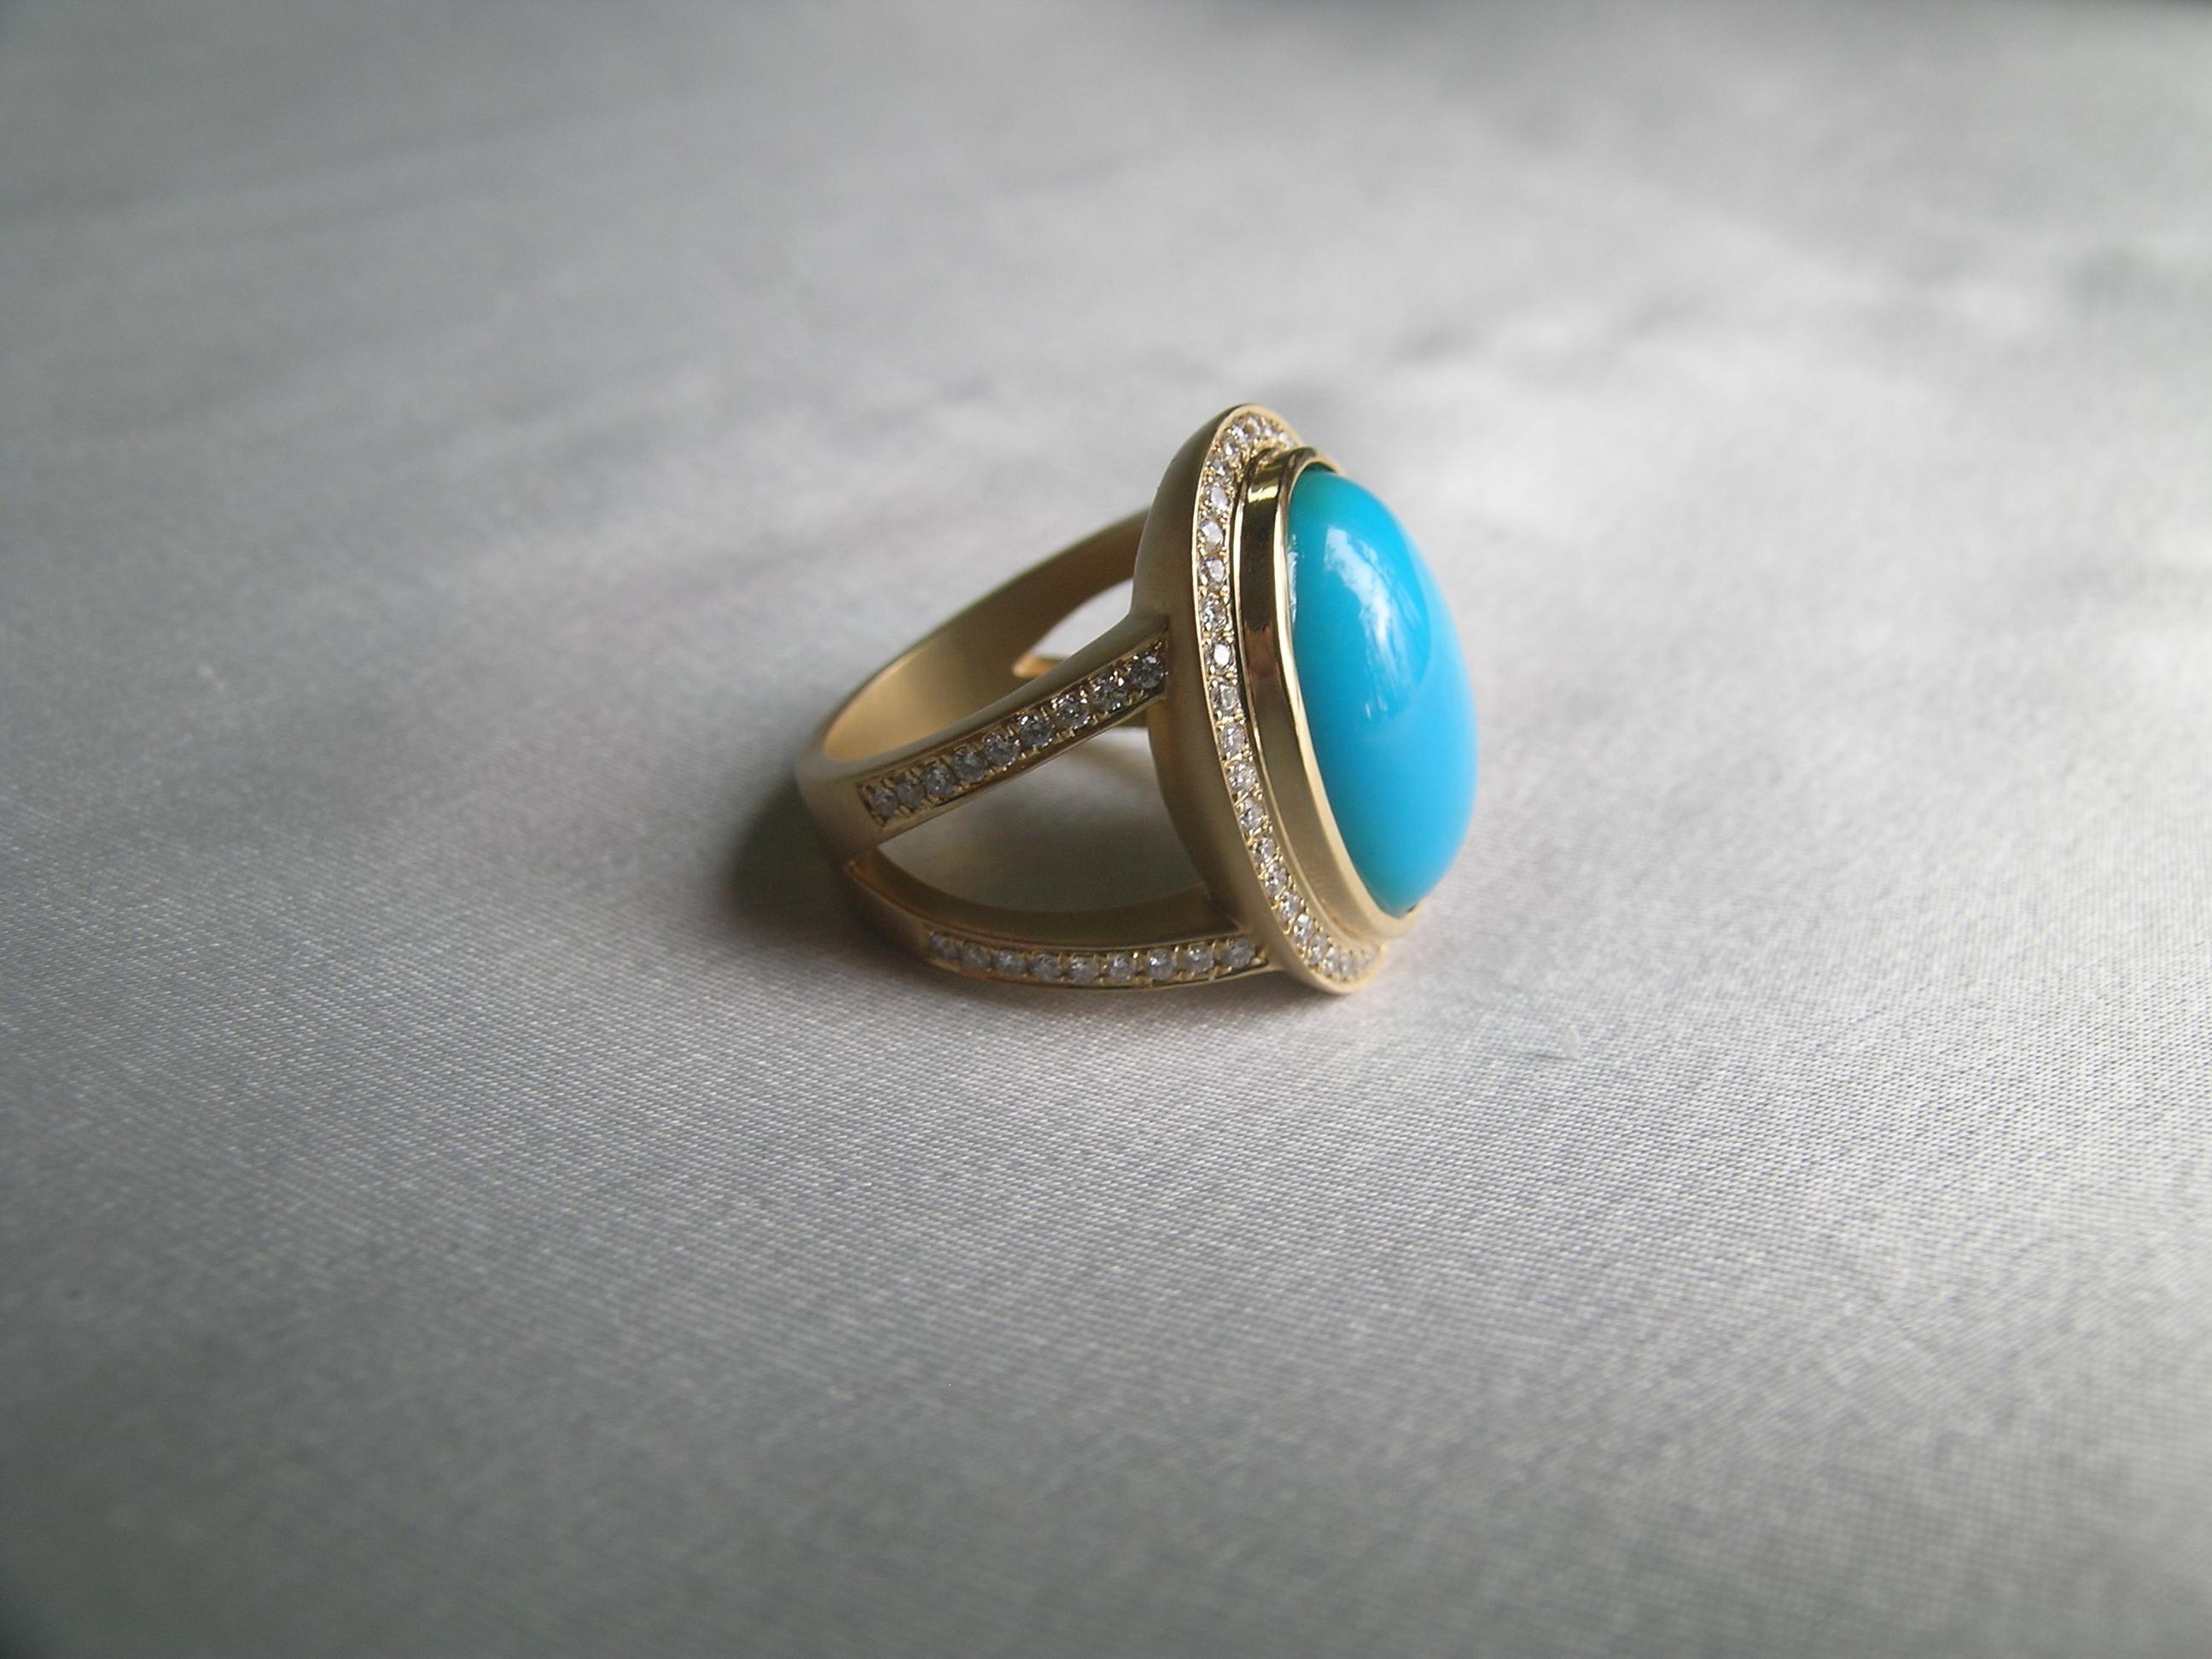 The finest turquoise in the world came from a mine in Arizona which no longer harvests turquoise.  The name is Sleeping Beauty Turquoise and is now rare.  Our last big oval piece in our inventory is used for this ring.  It is quite elegant and the